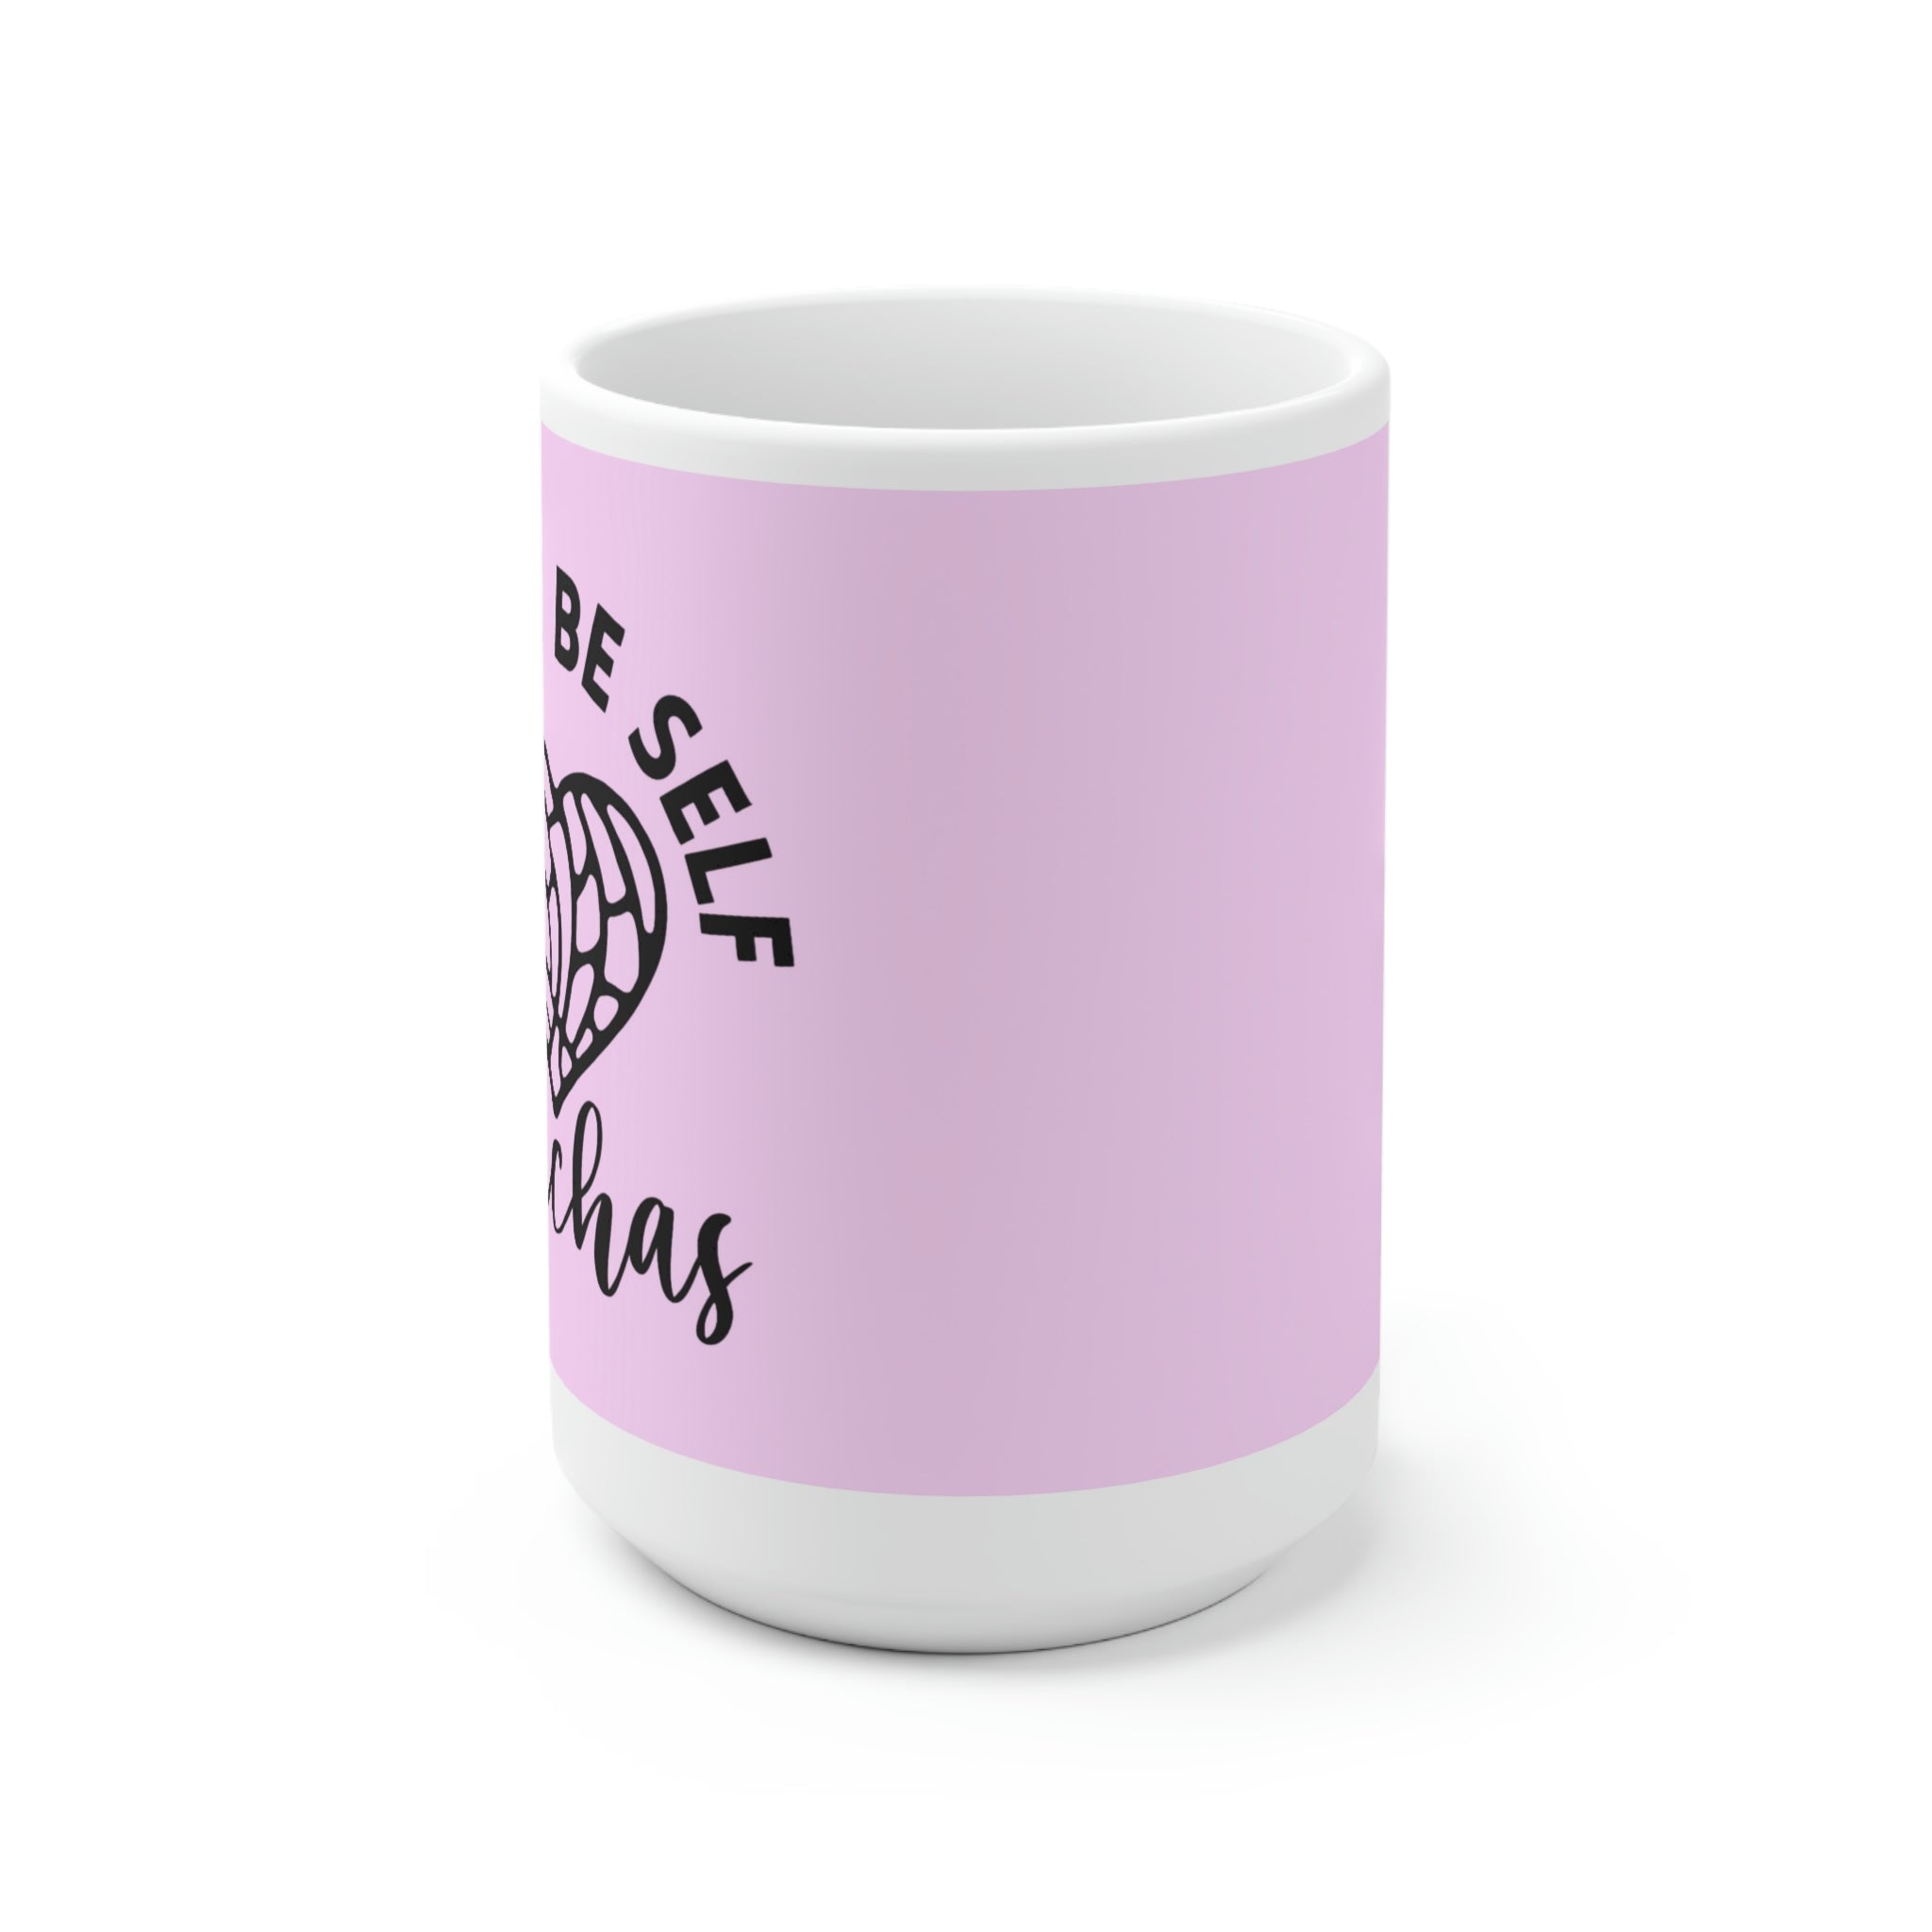 alternate view of a tall white mug with funny message for Latina women